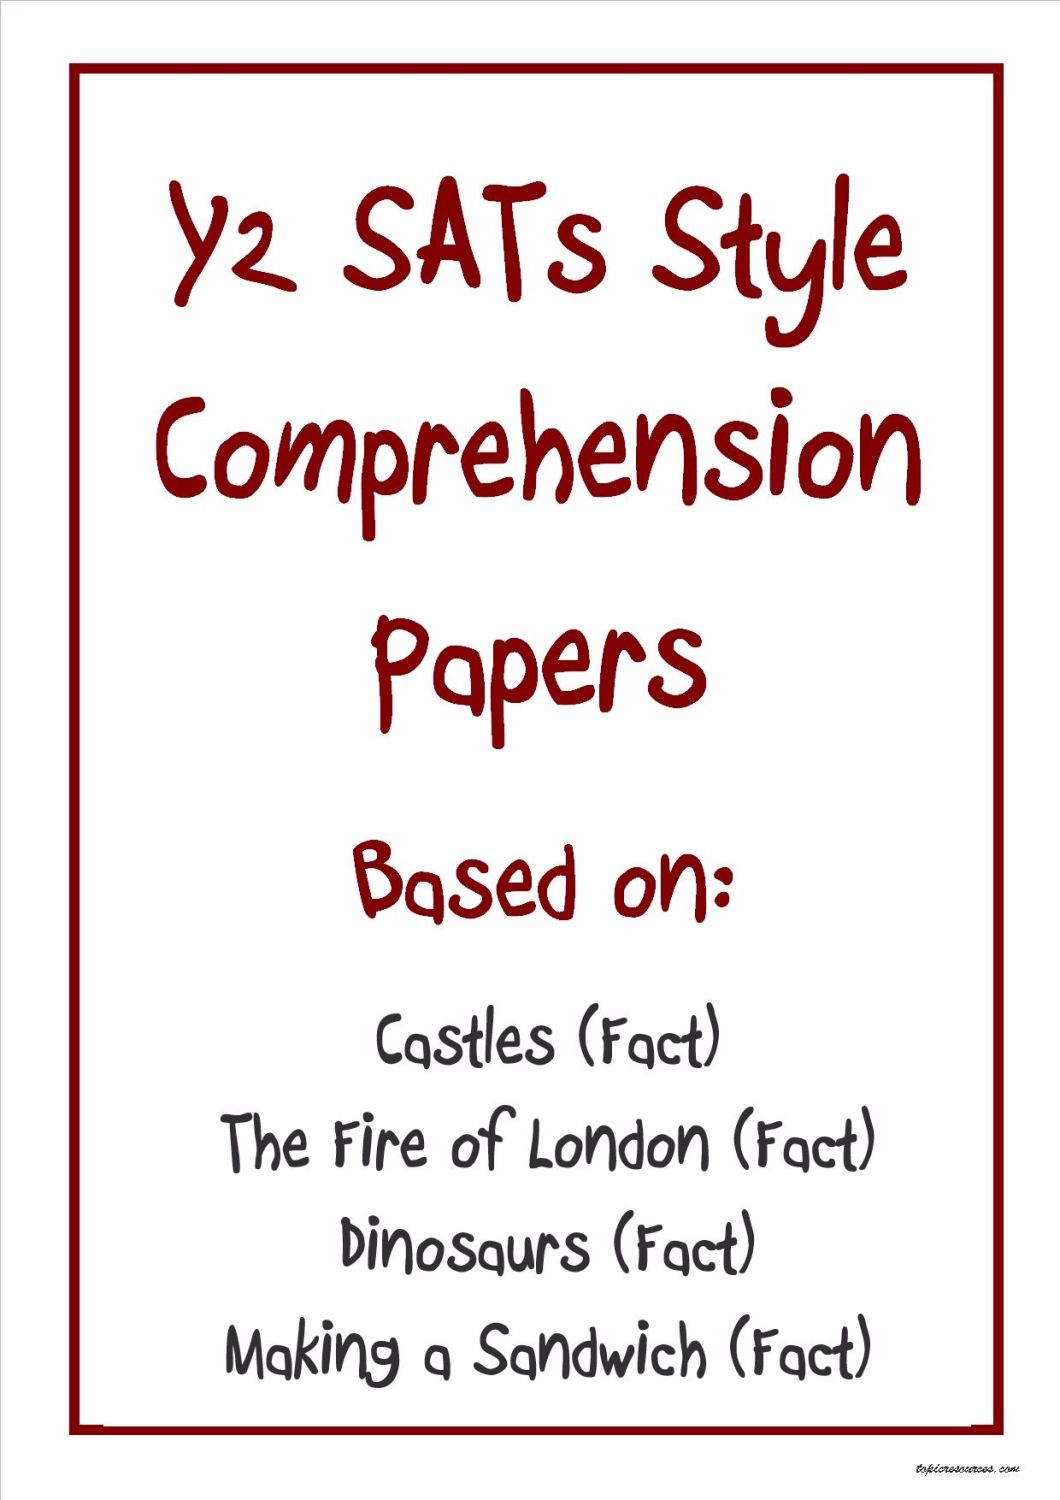 Non-fiction KS1 comprehension papers based on popular KS1 topics (pack 4).